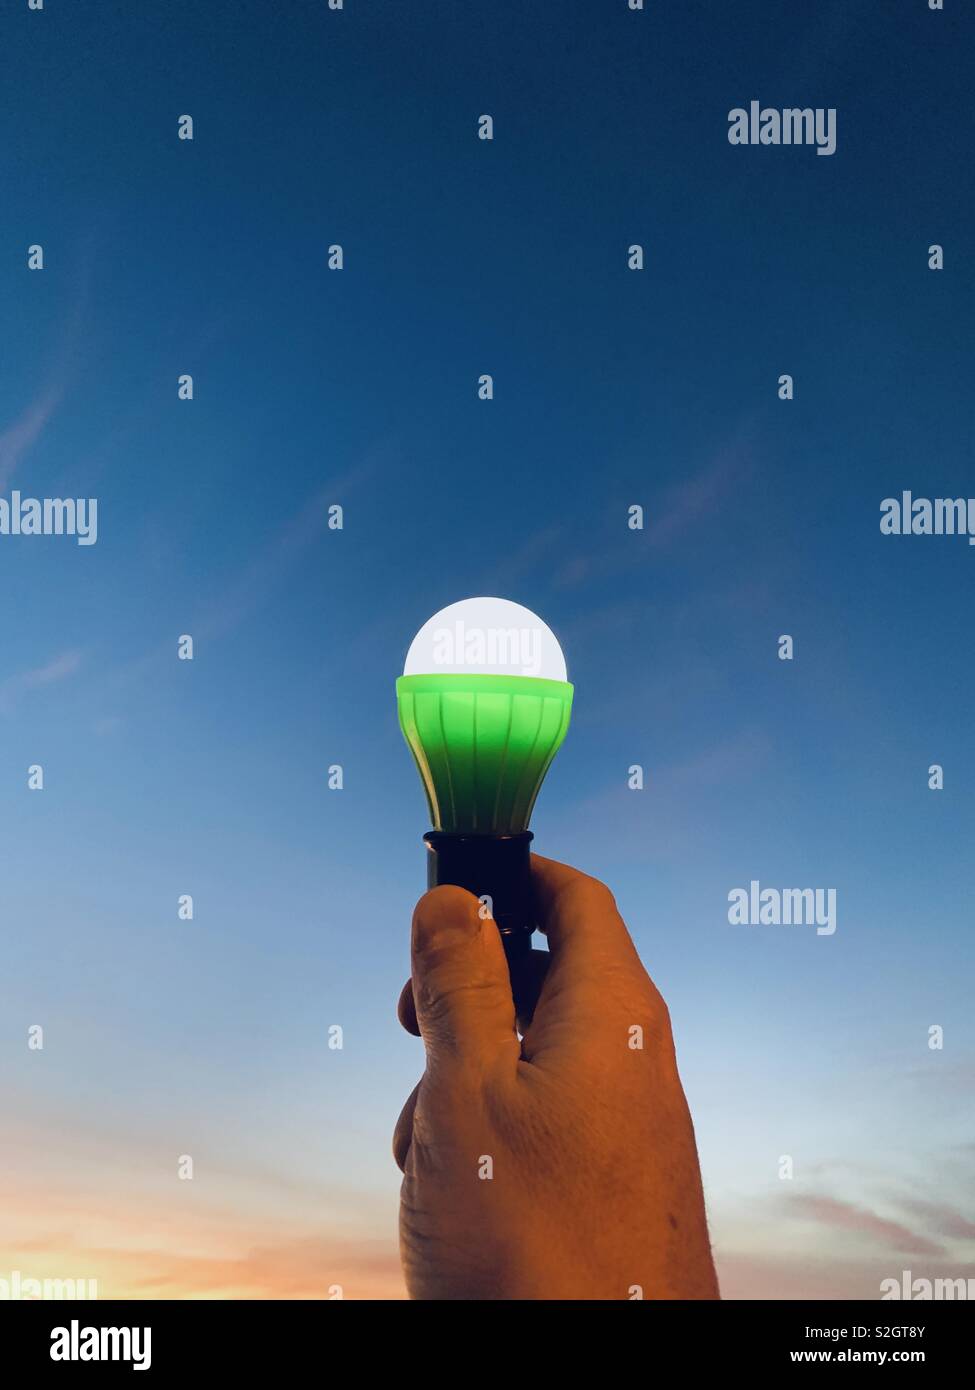 A hand holding a light bulb at sunset. Stock Photo